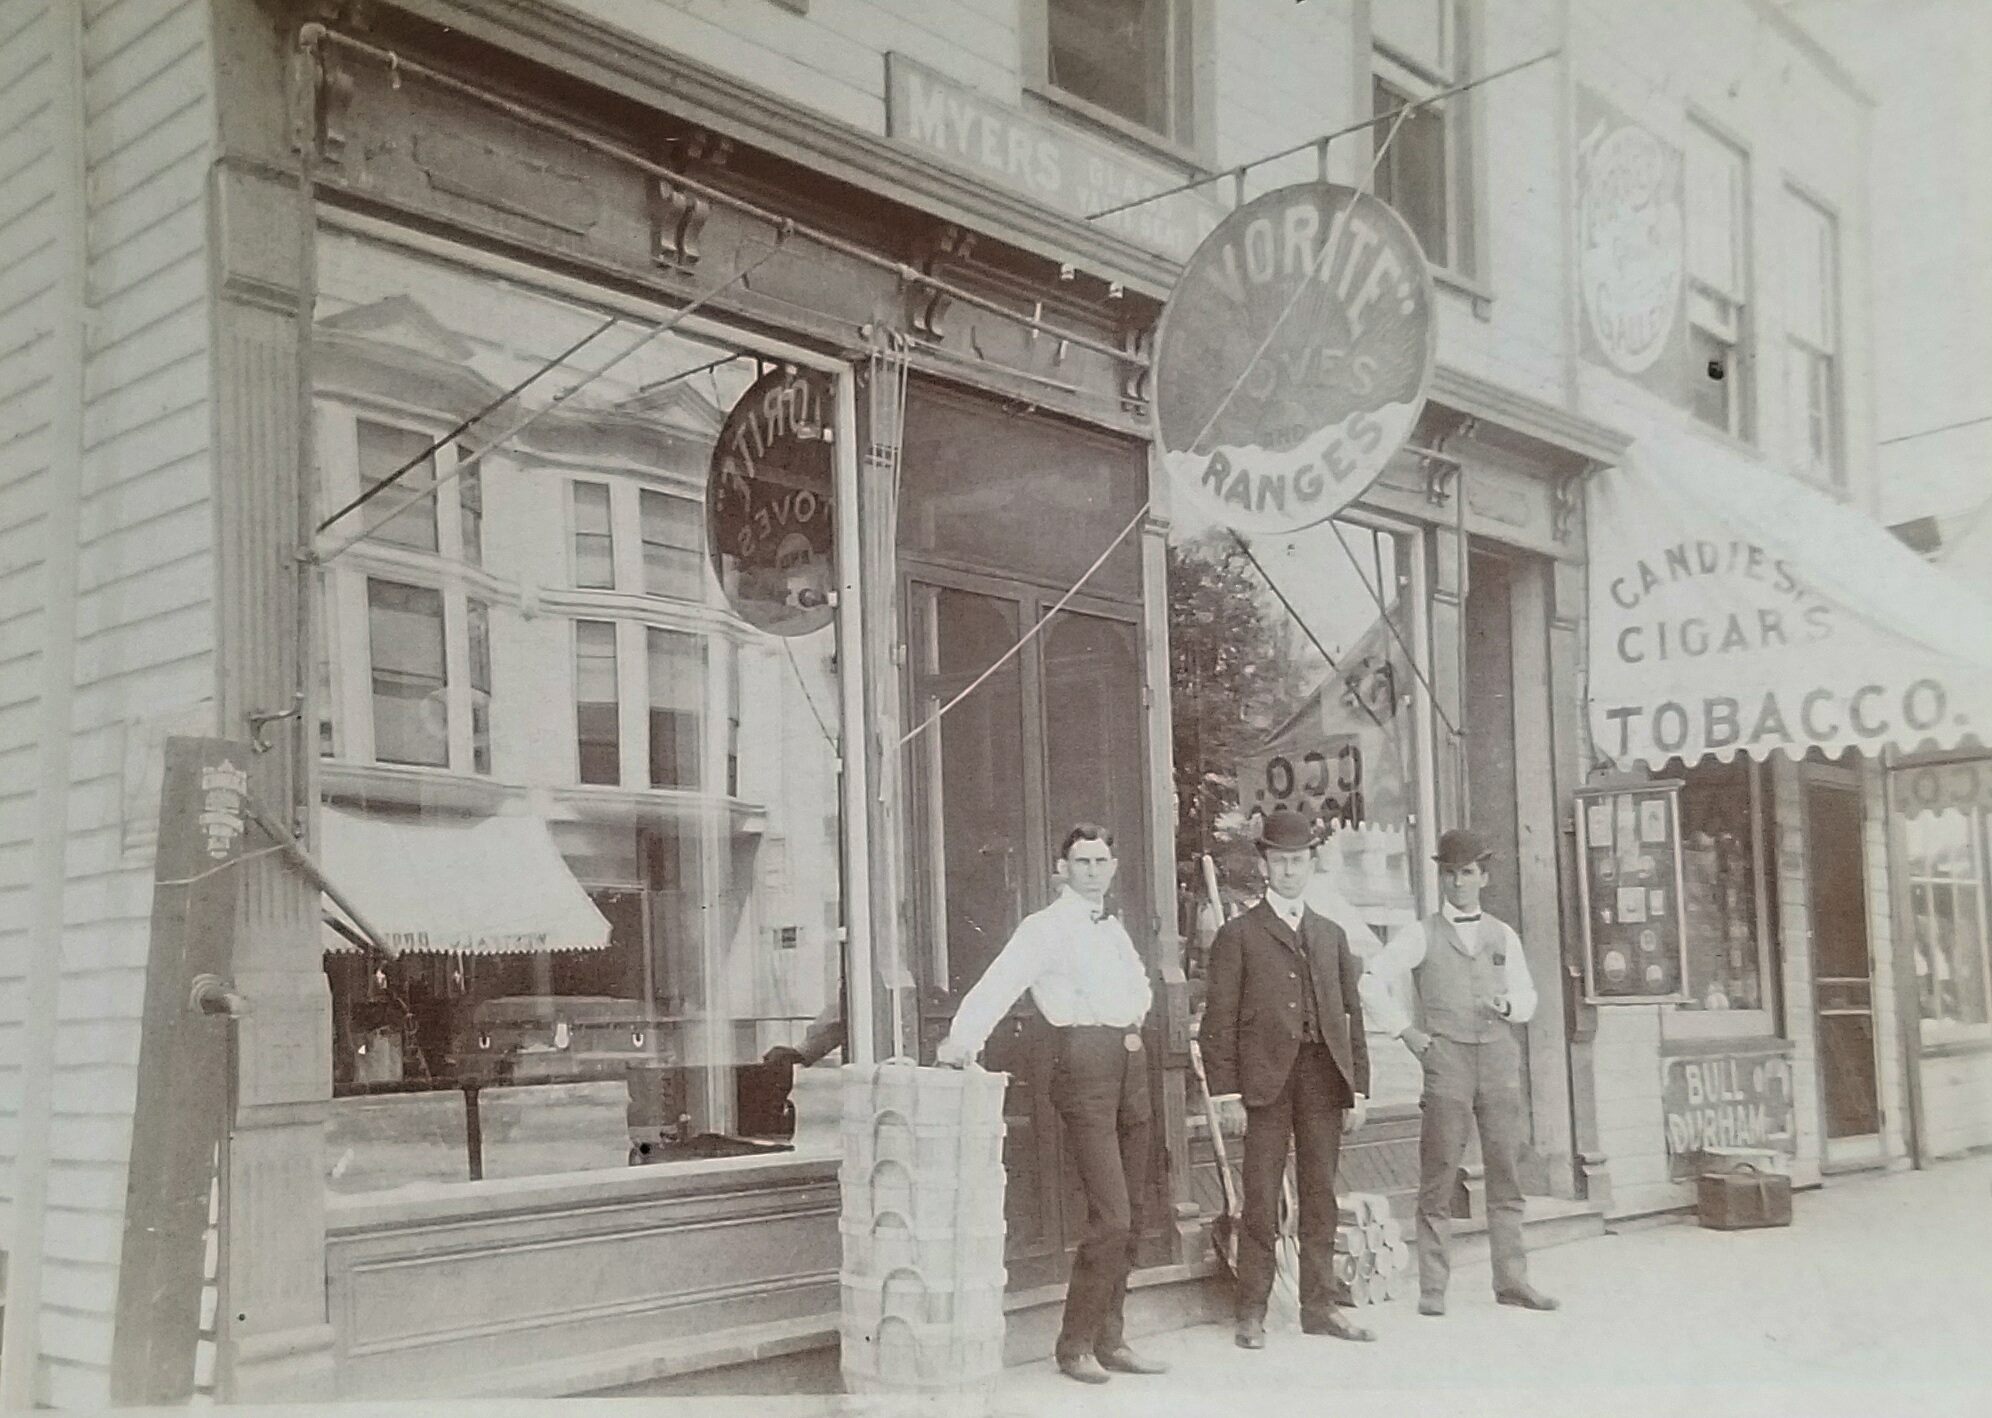  McConnaughey and Young Building at 114-118 E MAIN STREET